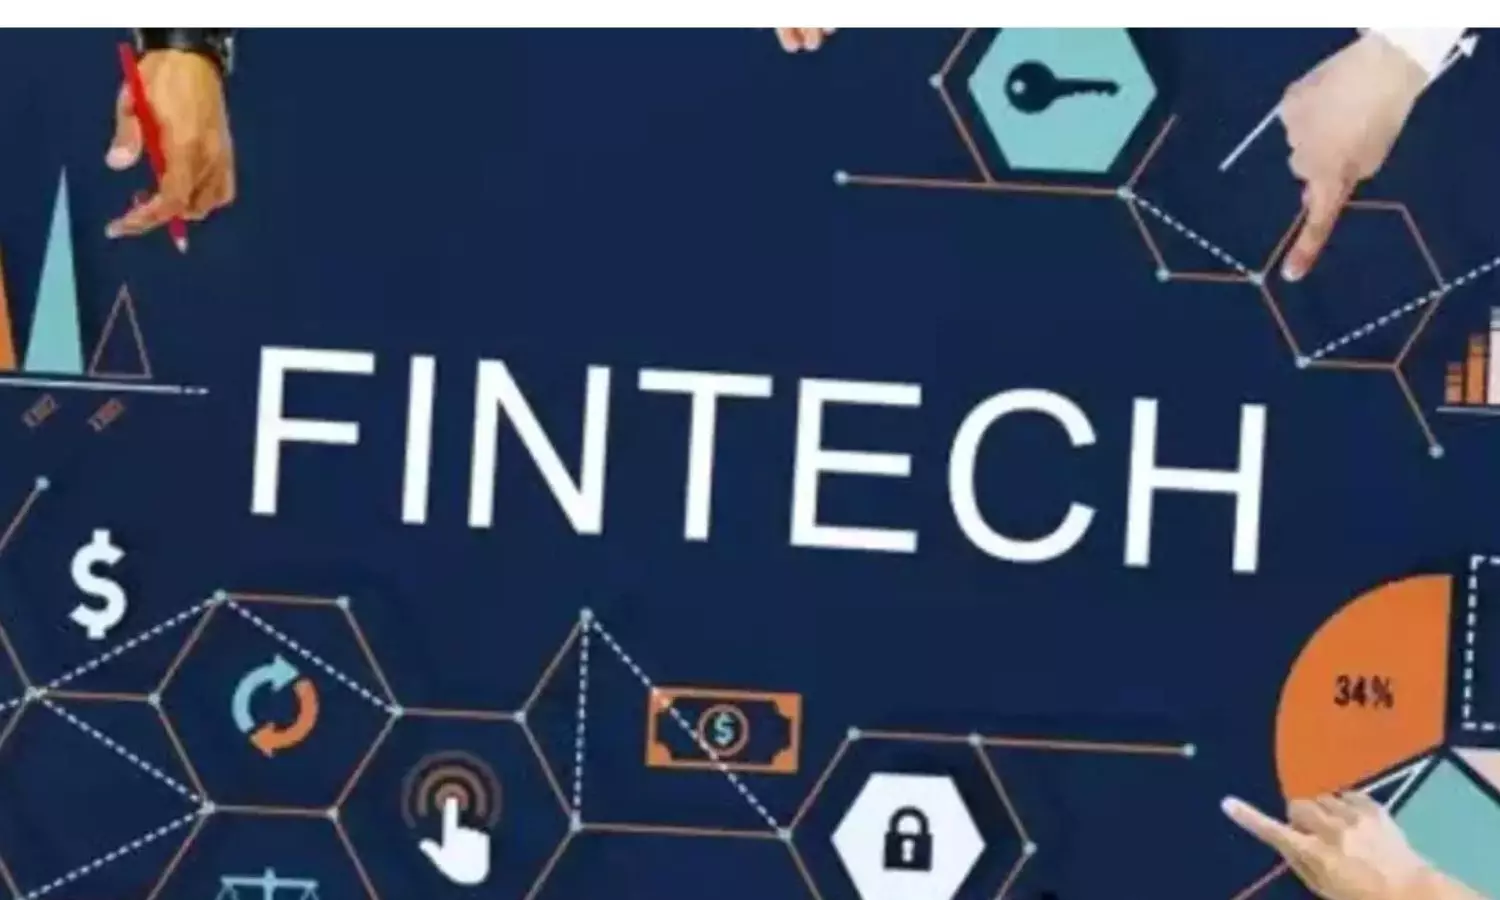 Fintech funding at $242 million so far this year